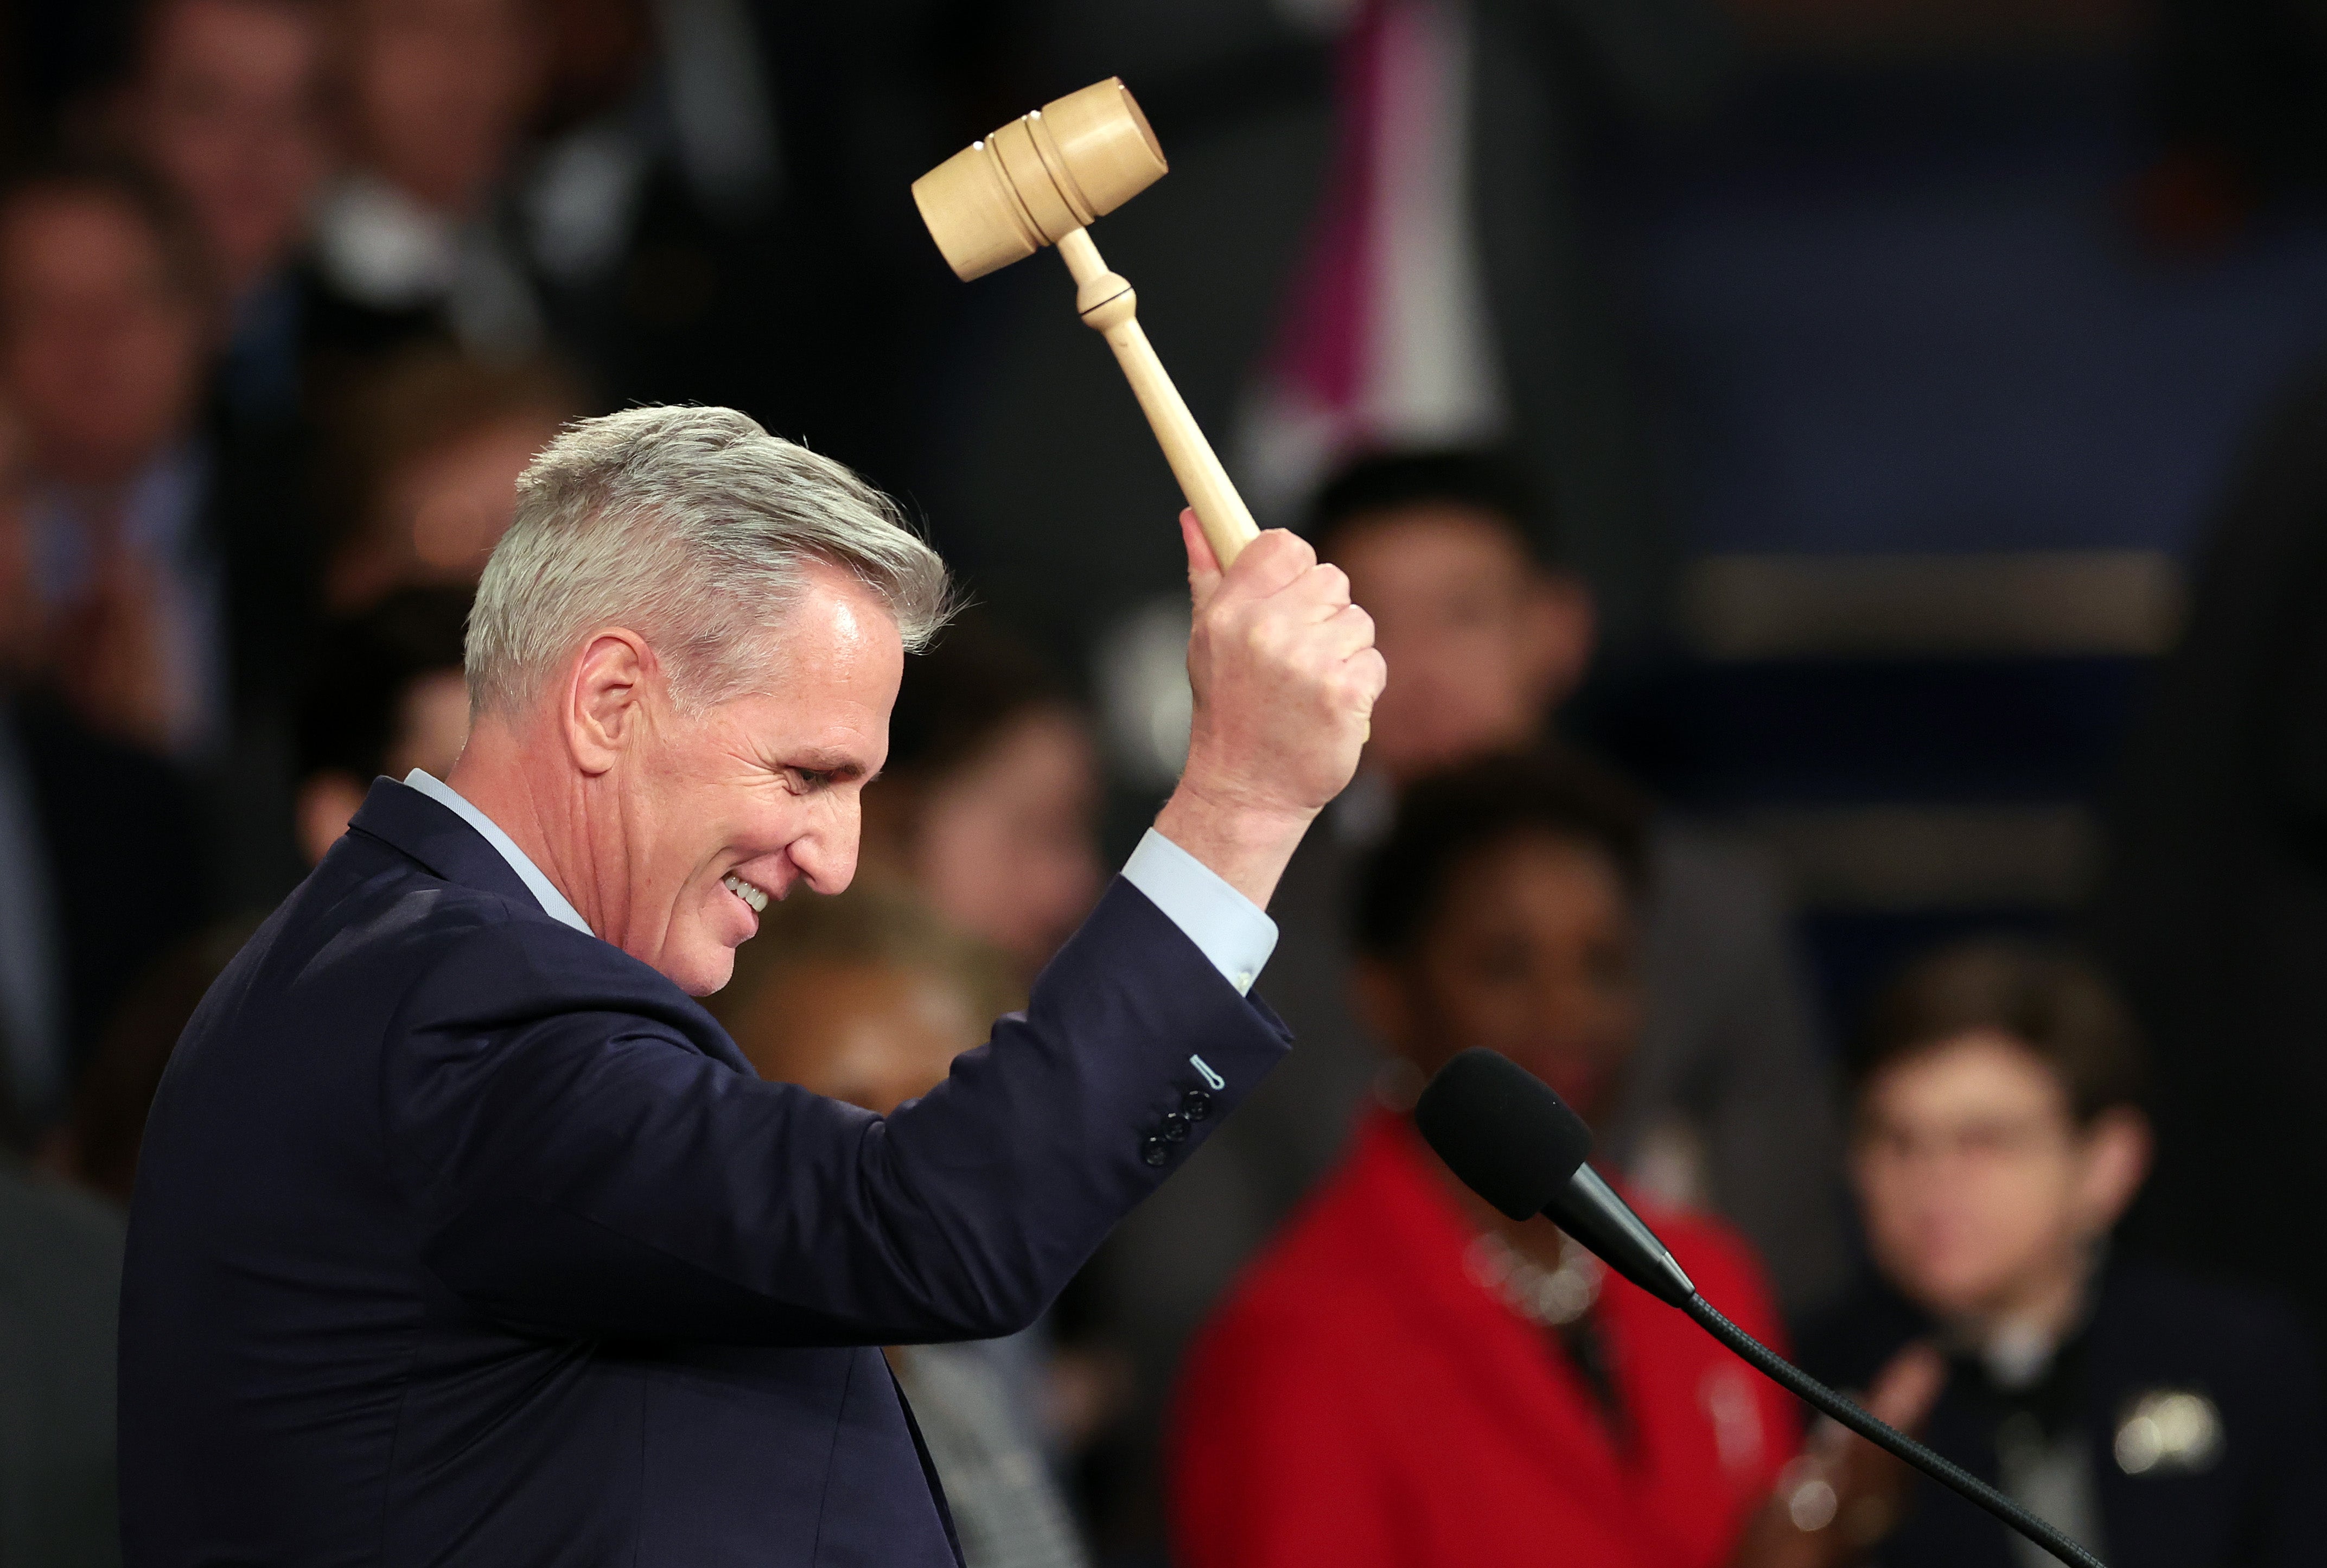 US speaker of the House Kevin McCarthy celebrates with the gavel after being elected as Speaker in the House Chamber at the US Capitol Building on 7 January 2023 in Washington, DC